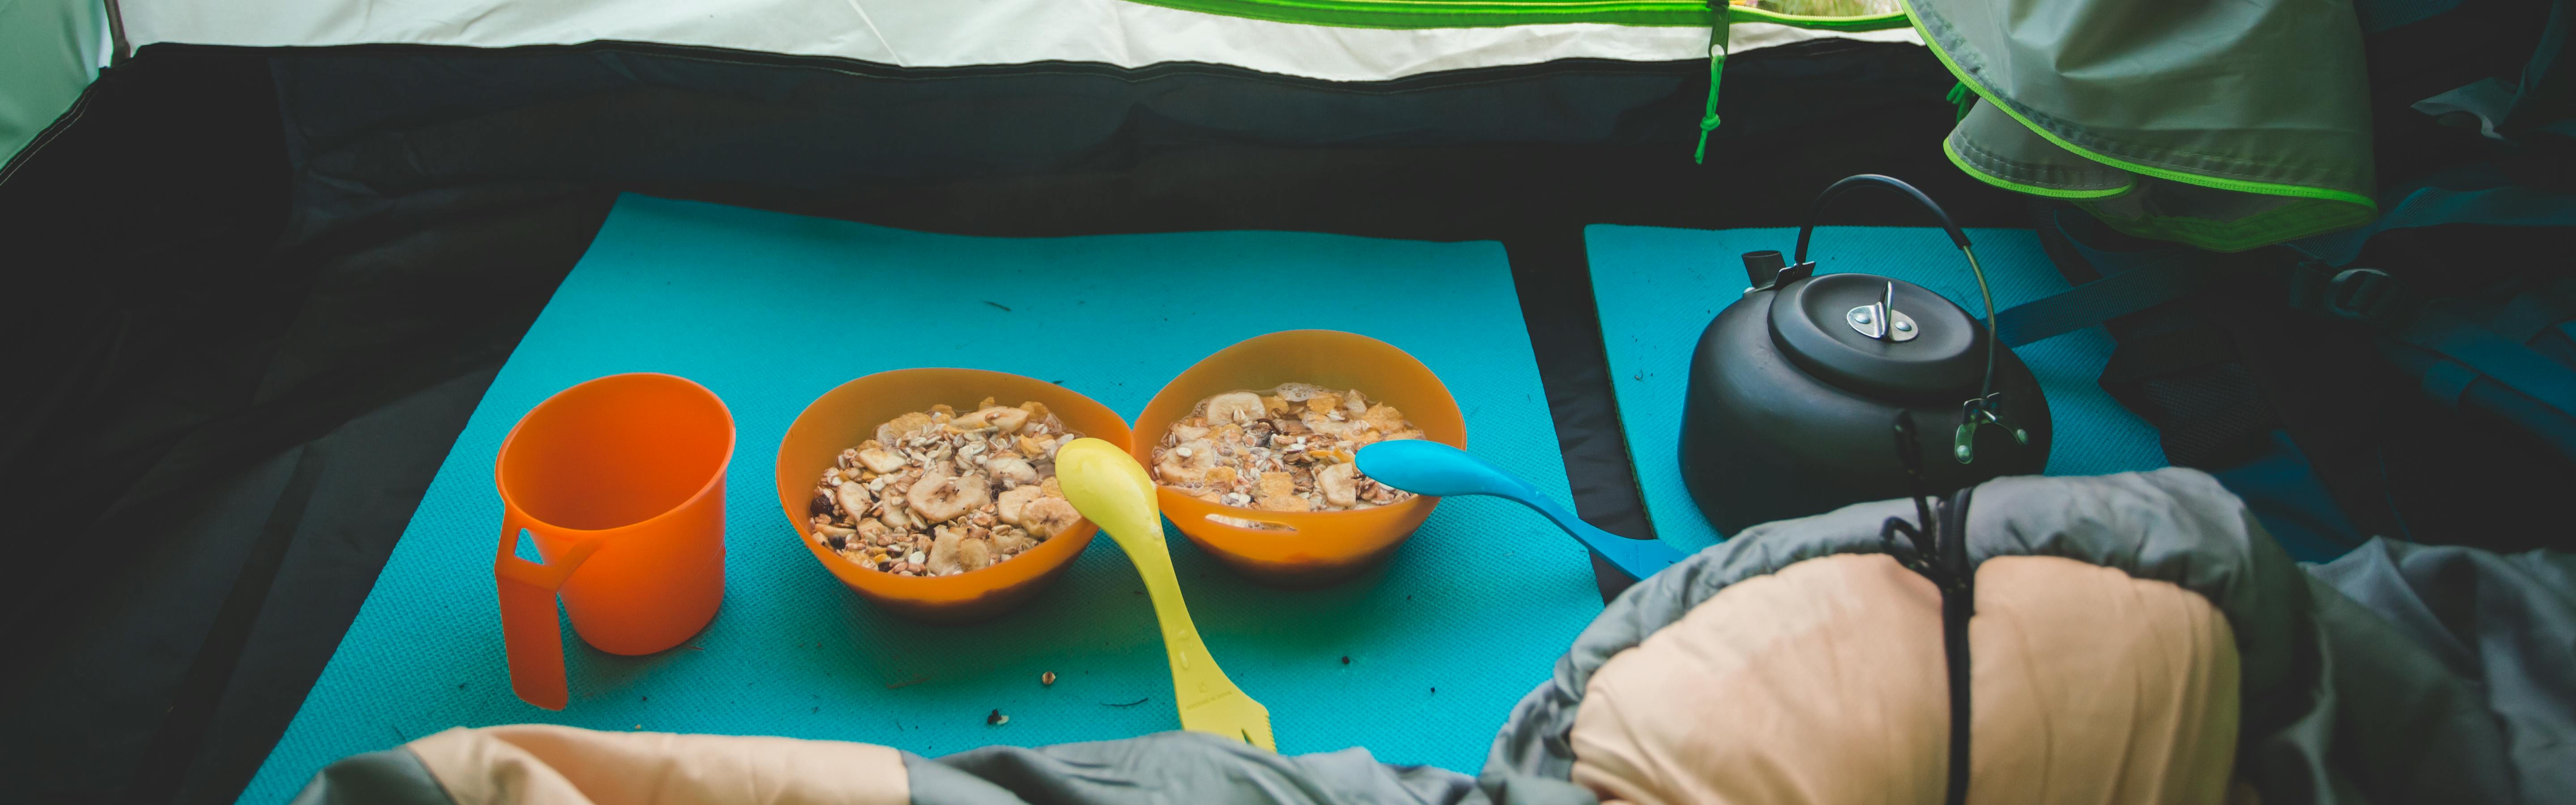 Two bowls of oatmeal in plastic bowls. They each have a camping spoon in them and there is a plastic cup sitting next to the bowls. You can also see a kettle. The kettle, bowls, and cup are on a sleeping pad inside a tent. 